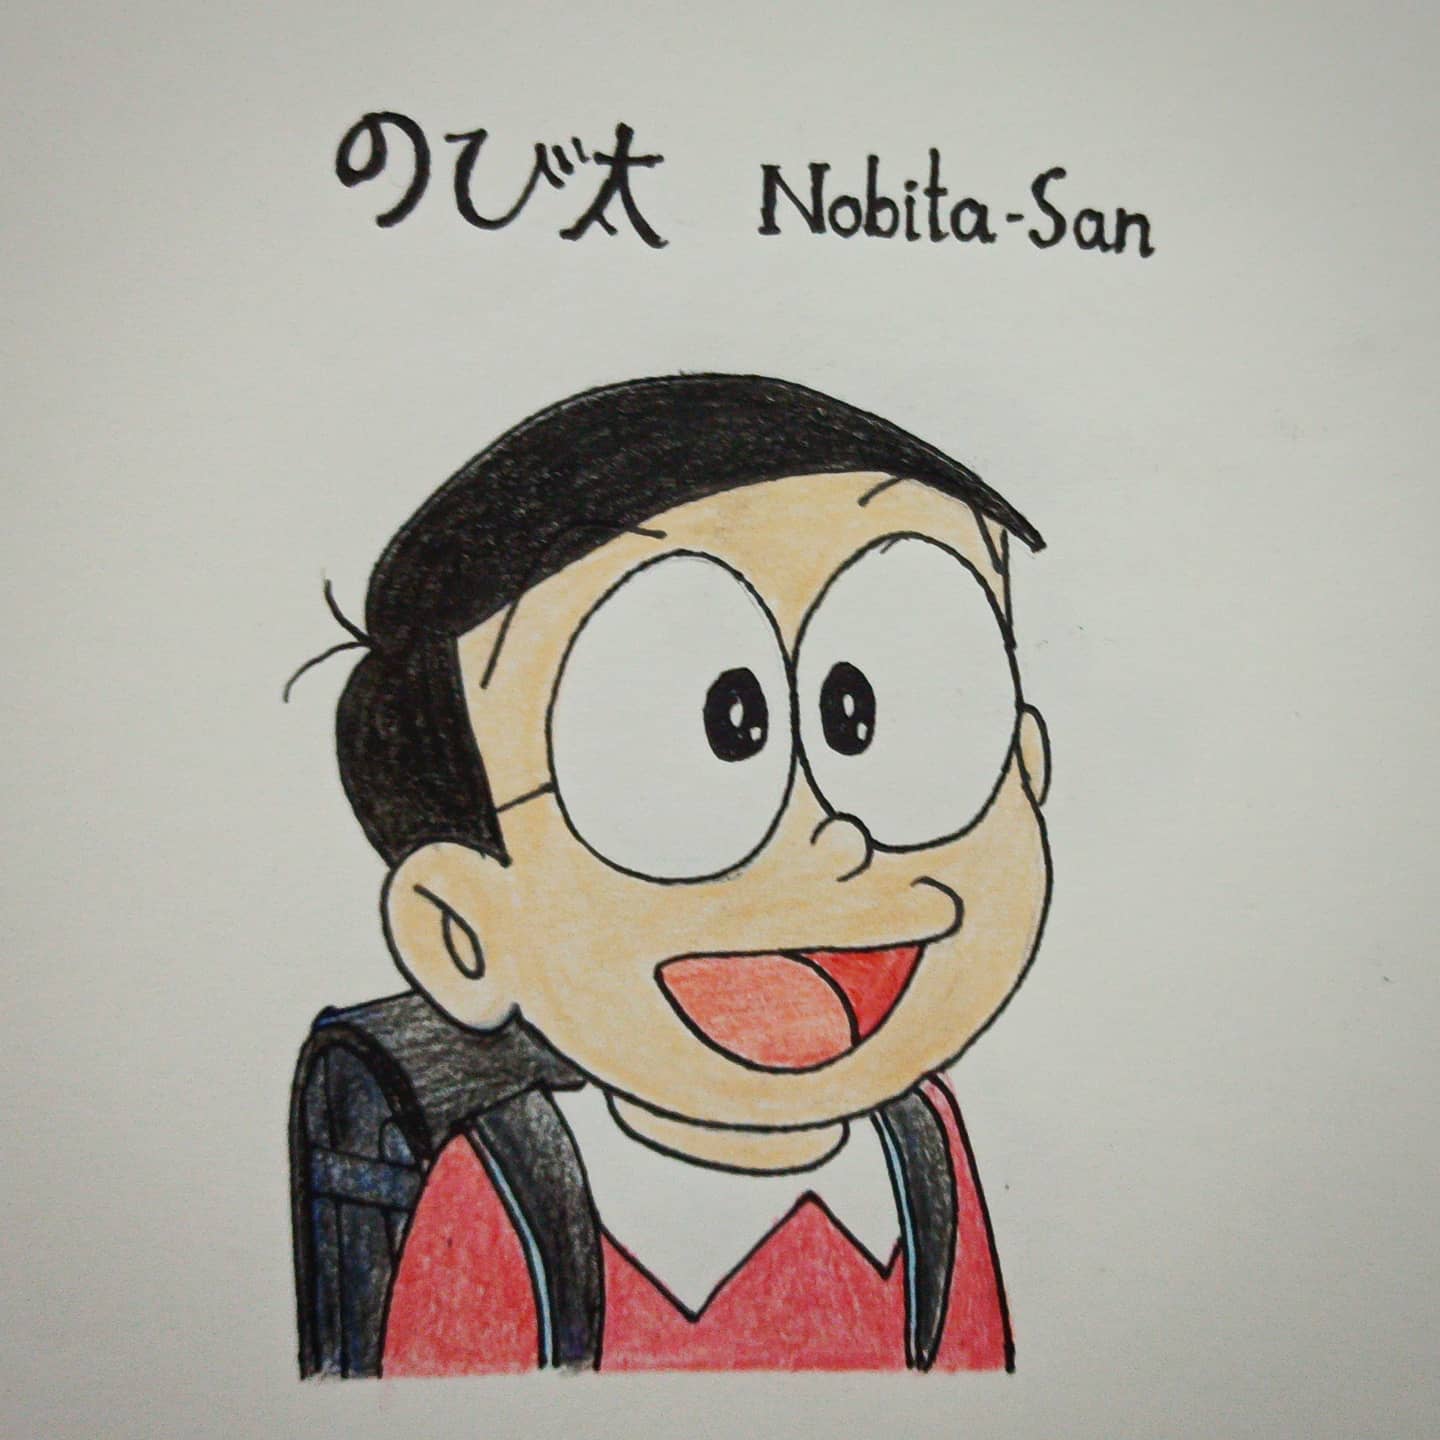 Pabitra's Art - https://youtu.be/wRr6bxiIsz8 How To Draw Nobita & Shizuka  Pencil Sketch Drawing... Thank you for watching.... Please Do It - Like //  Subscribe // share // Comment // On my you